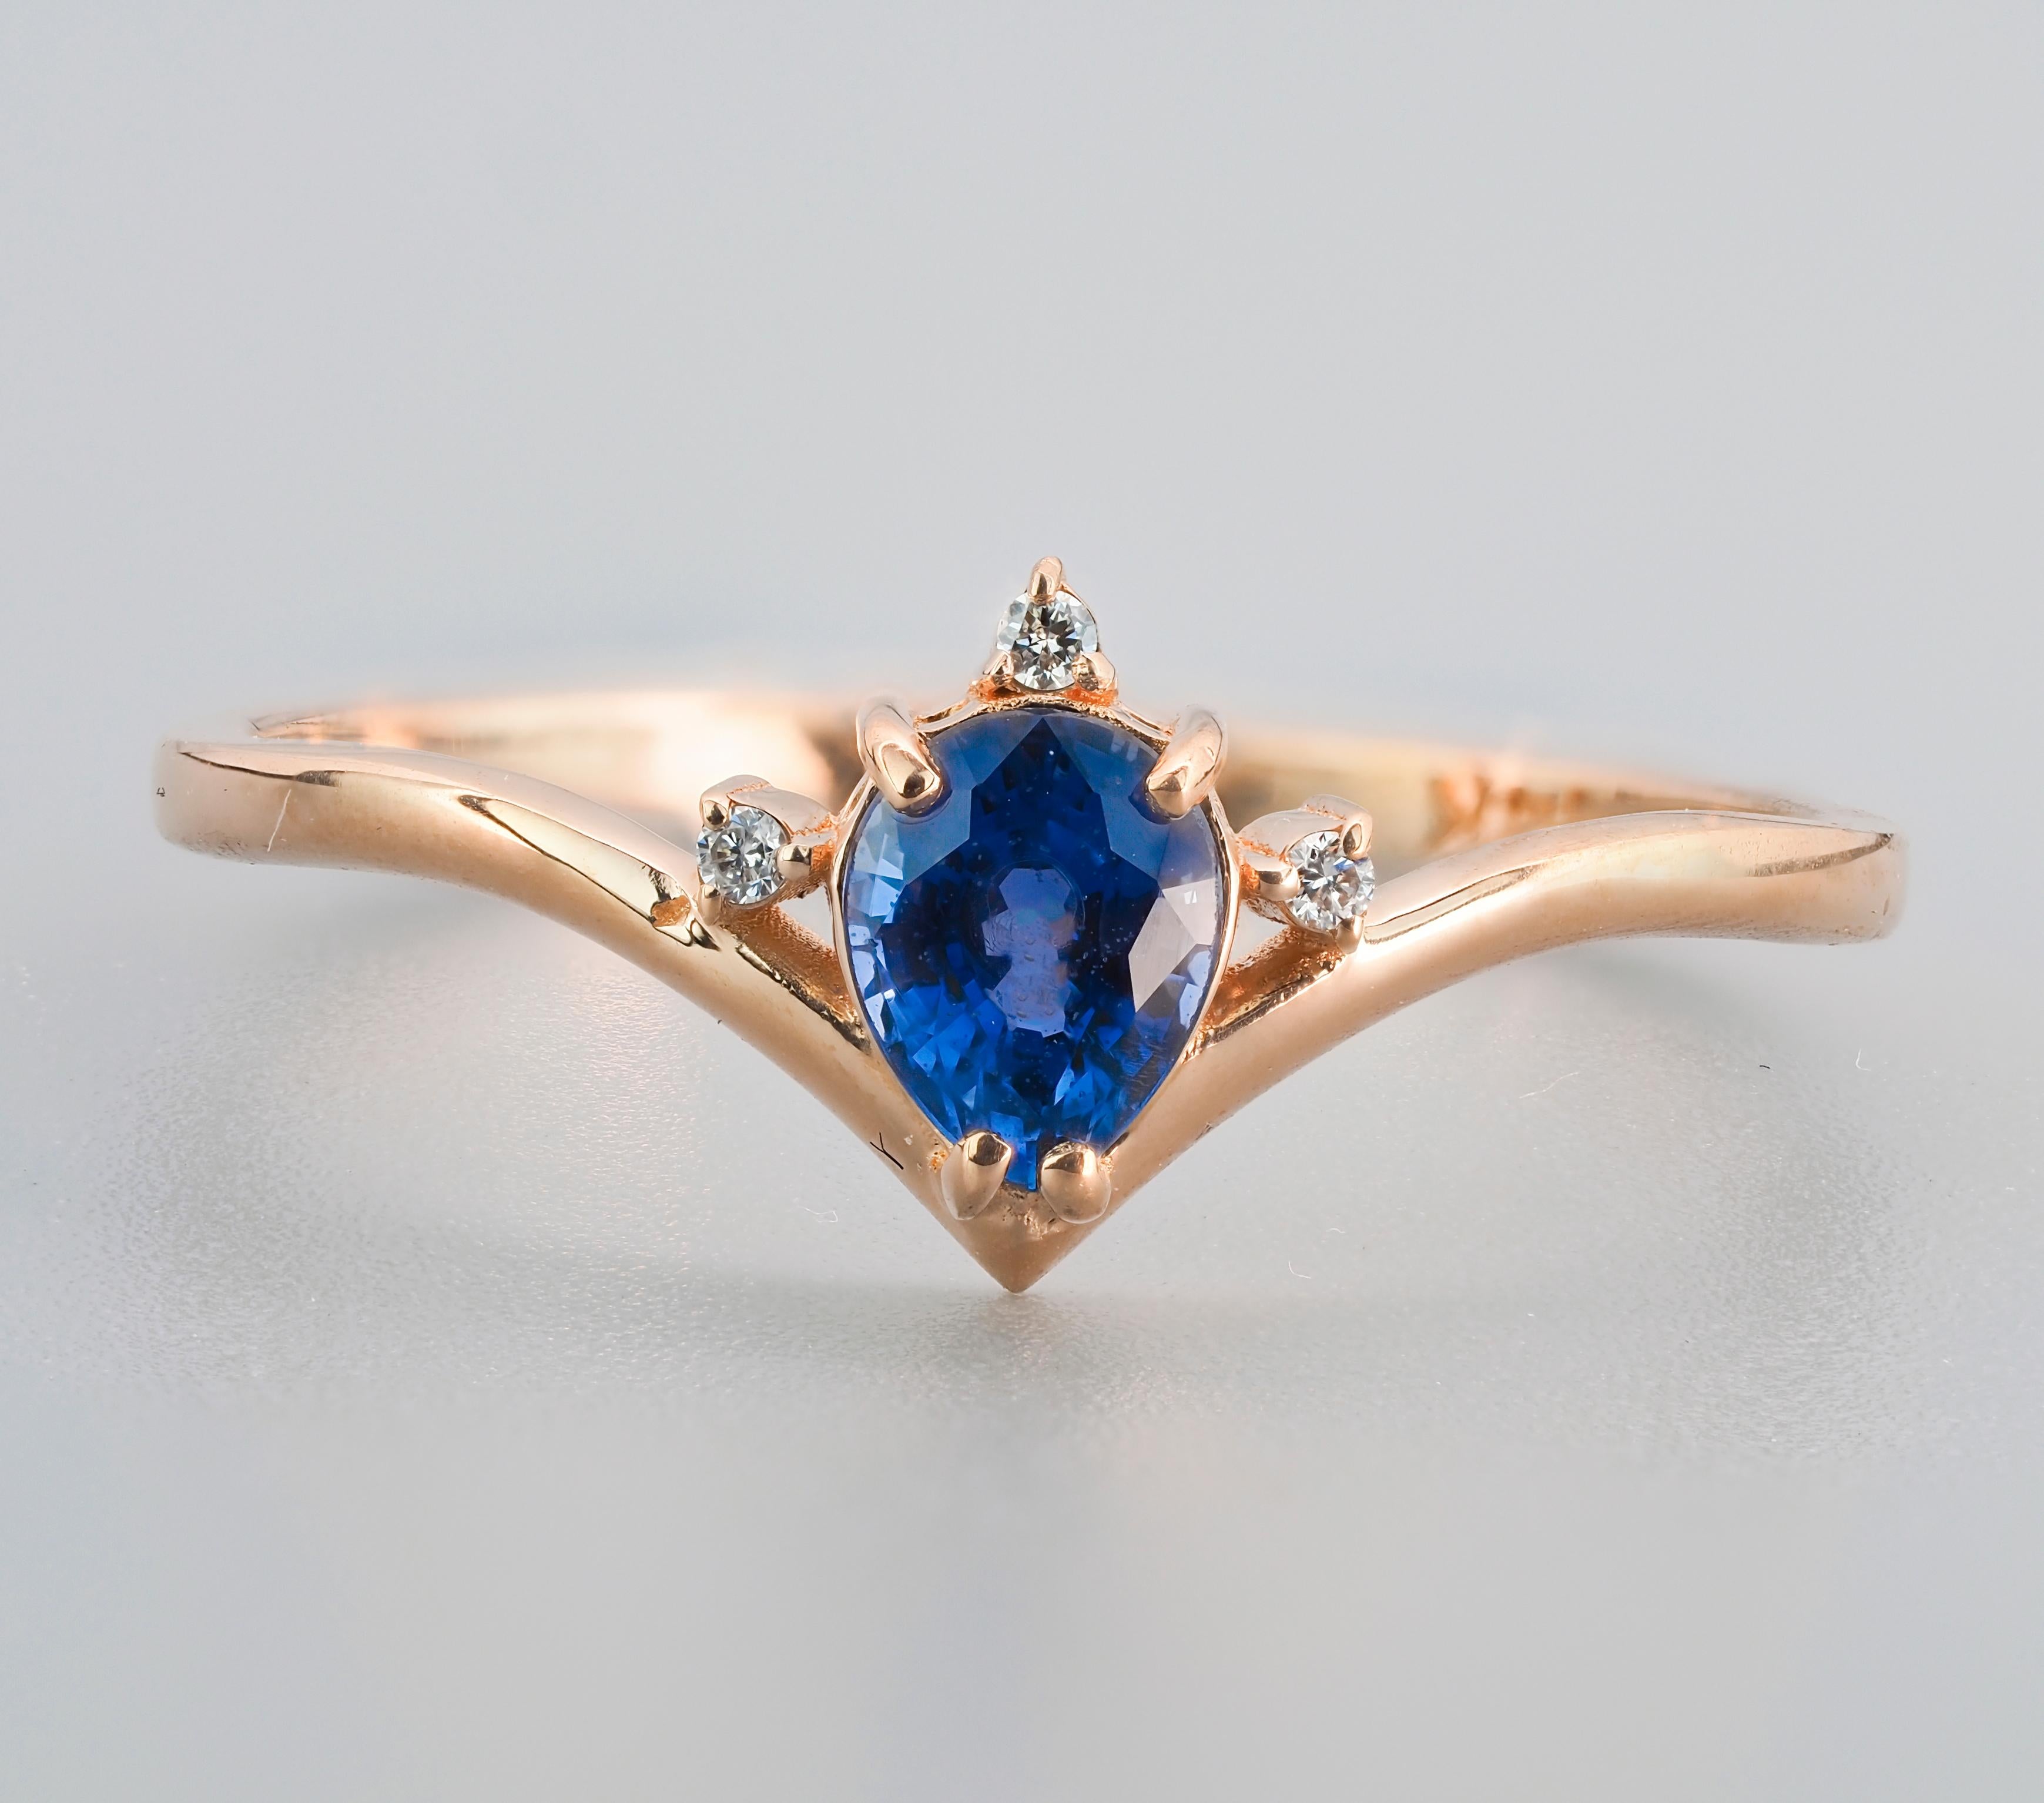 For Sale:  14k Gold Ring with Sapphire and Diamond 3